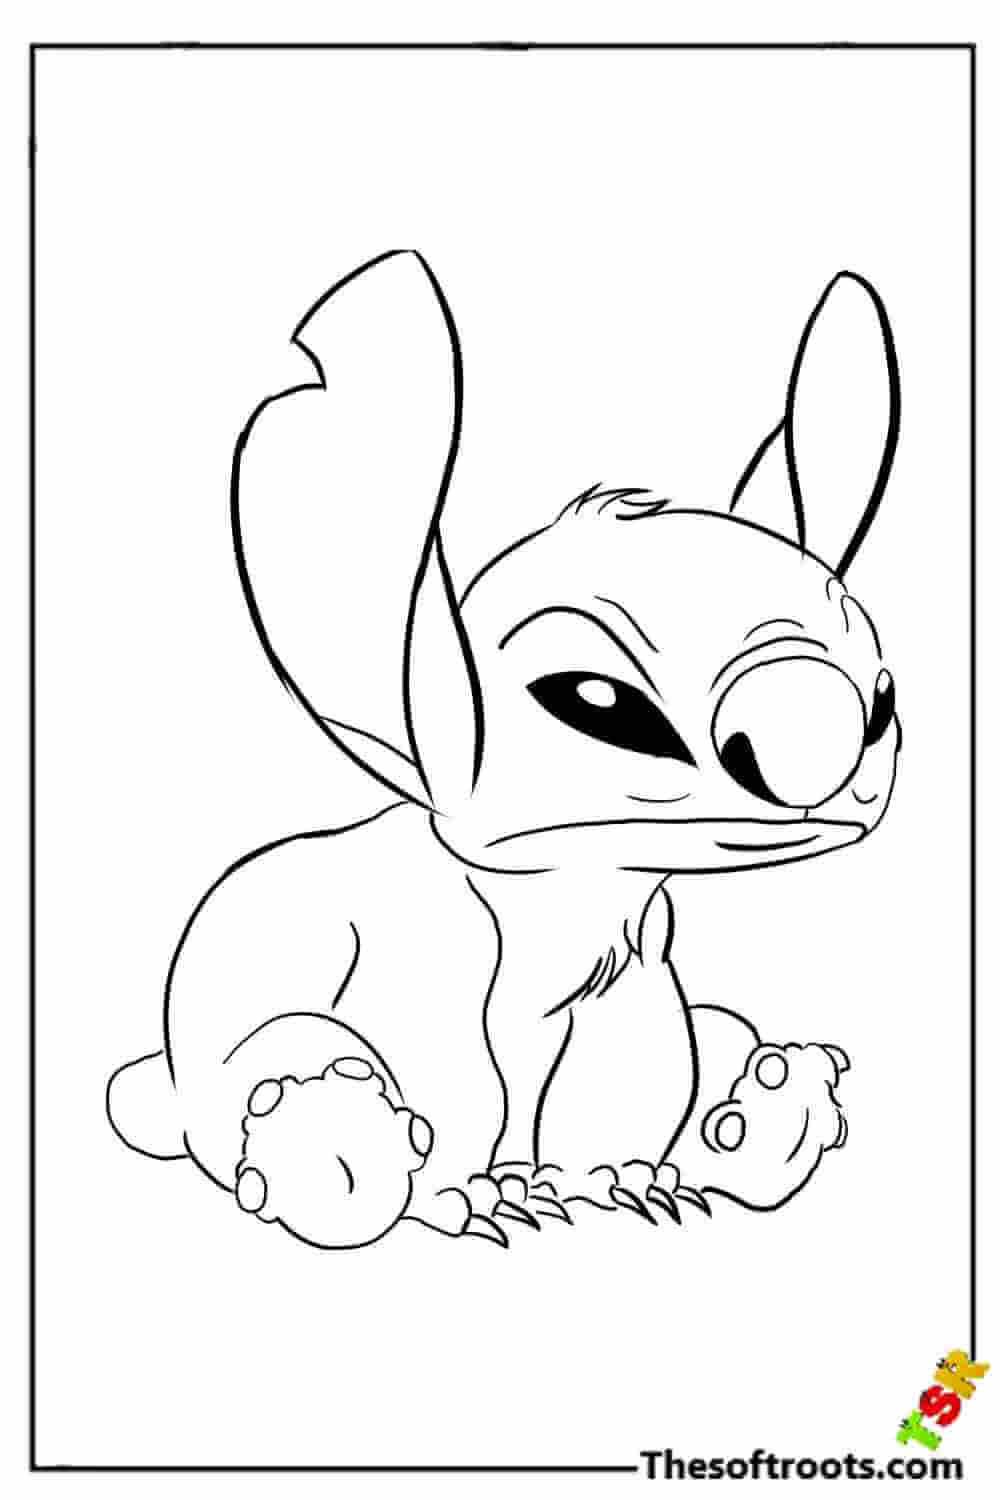 Angry Stitch coloring pages